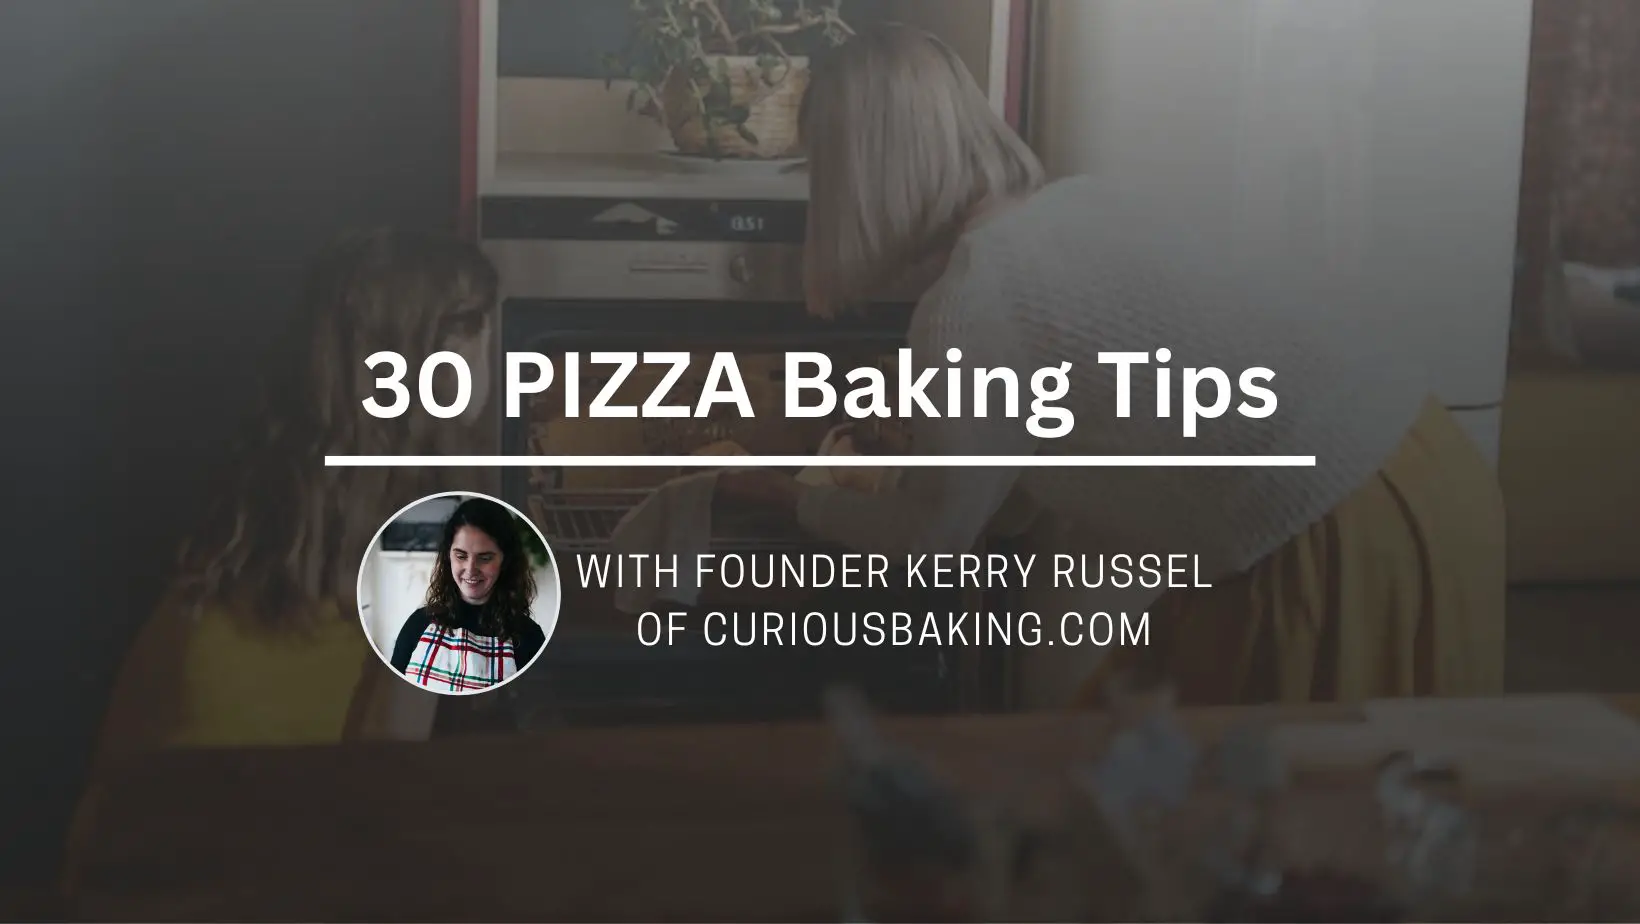 30 Pizza Baking Tips by CuriousBaking.com